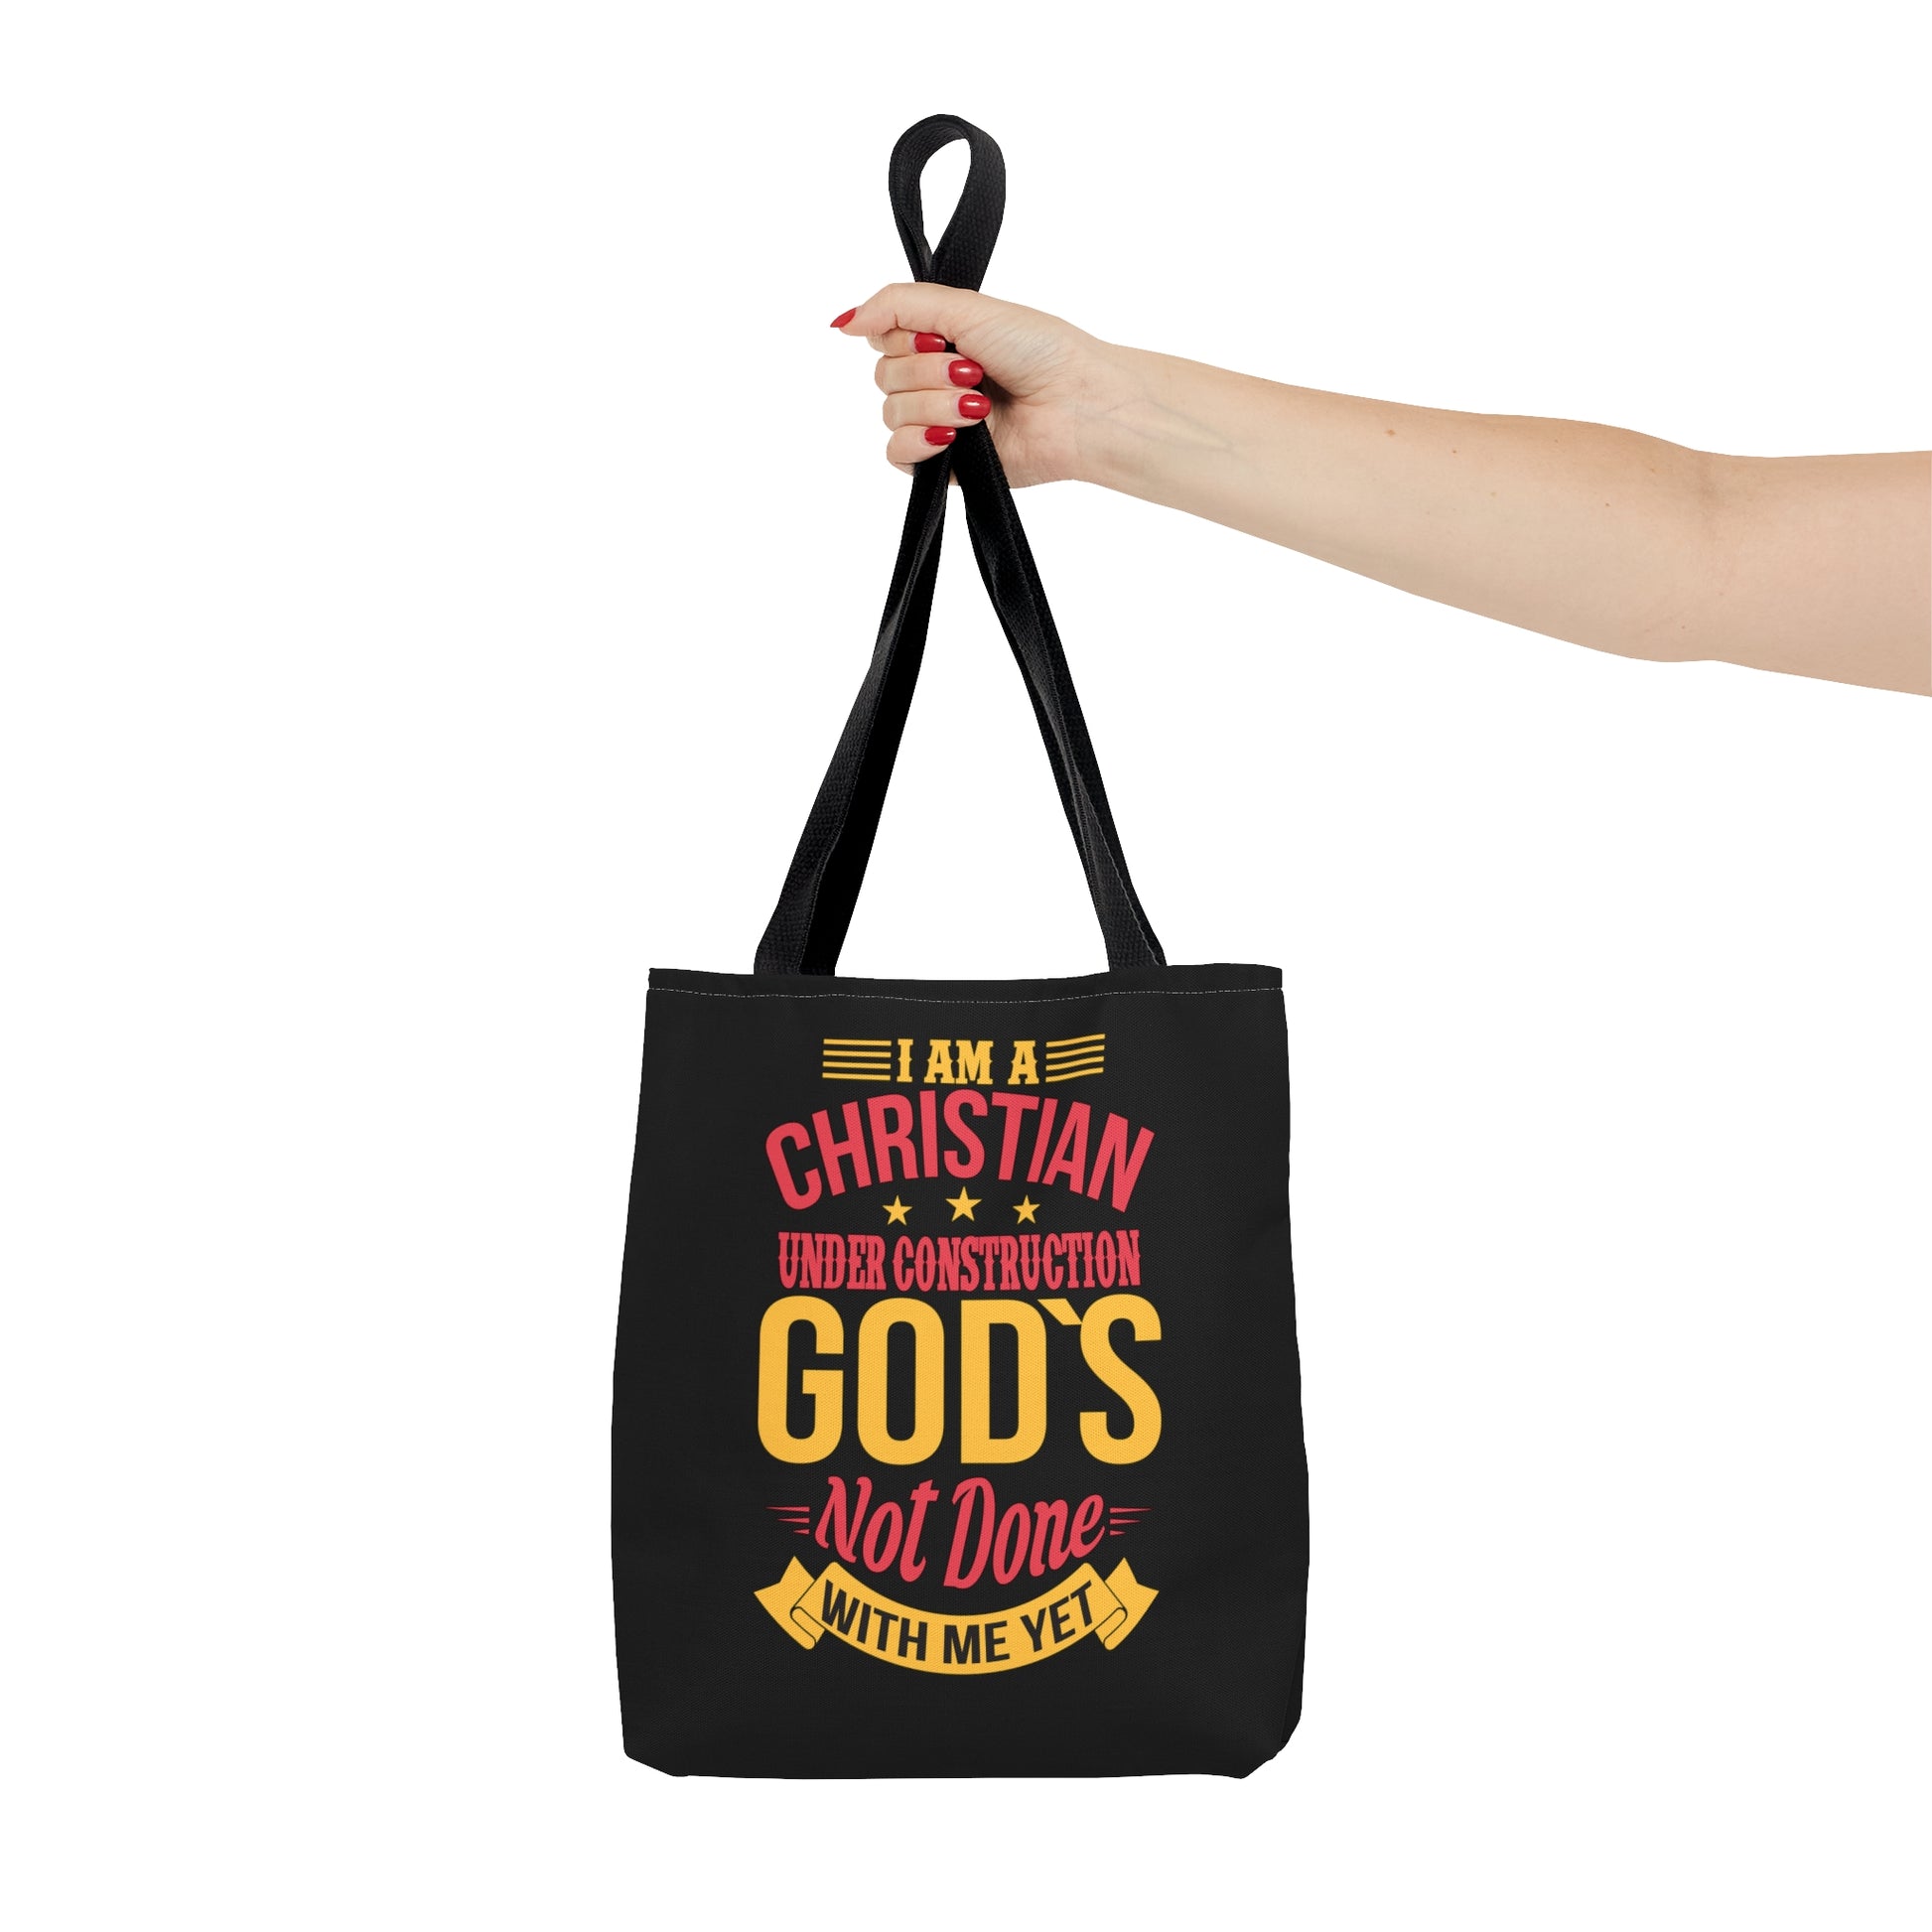 I'm A Christian Under Construction God's Not Done With Me Yet Christian Tote Bag Printify